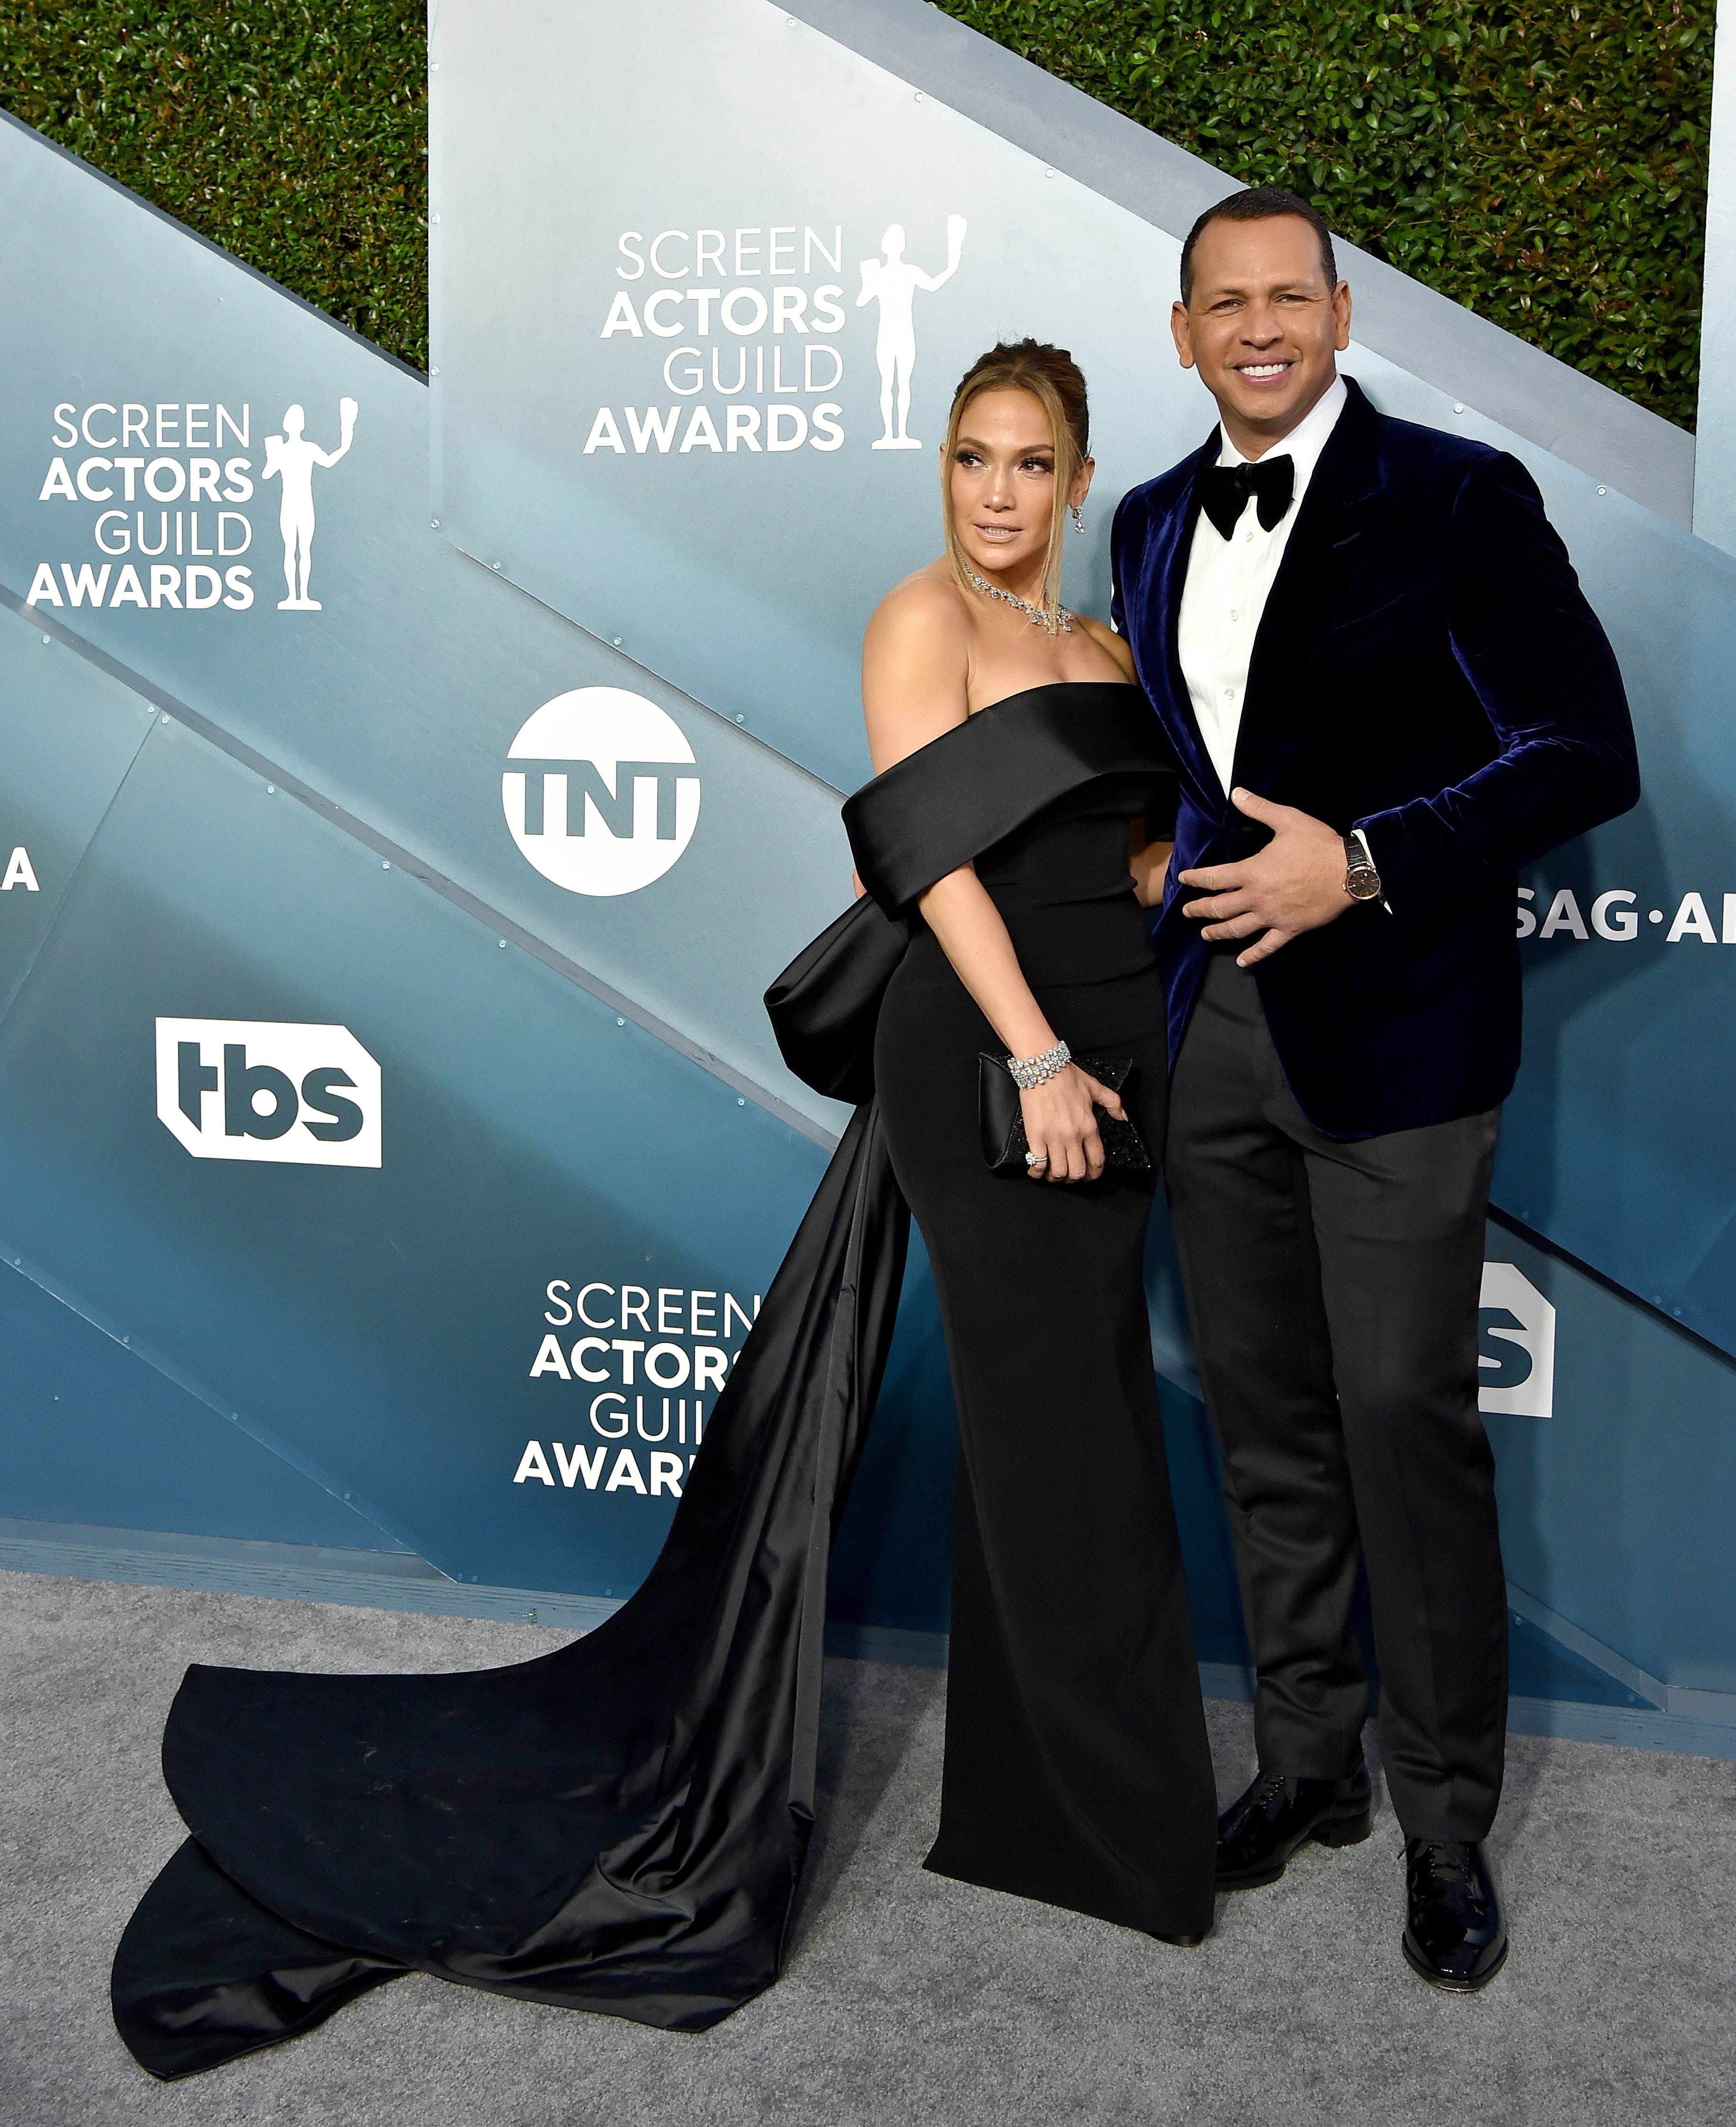 Jennifer Lopez and Alex Rodriguez attend the Screen Actors Guild Awards in Los Angeles, California on January 19, 2020 | Photo: Getty Images